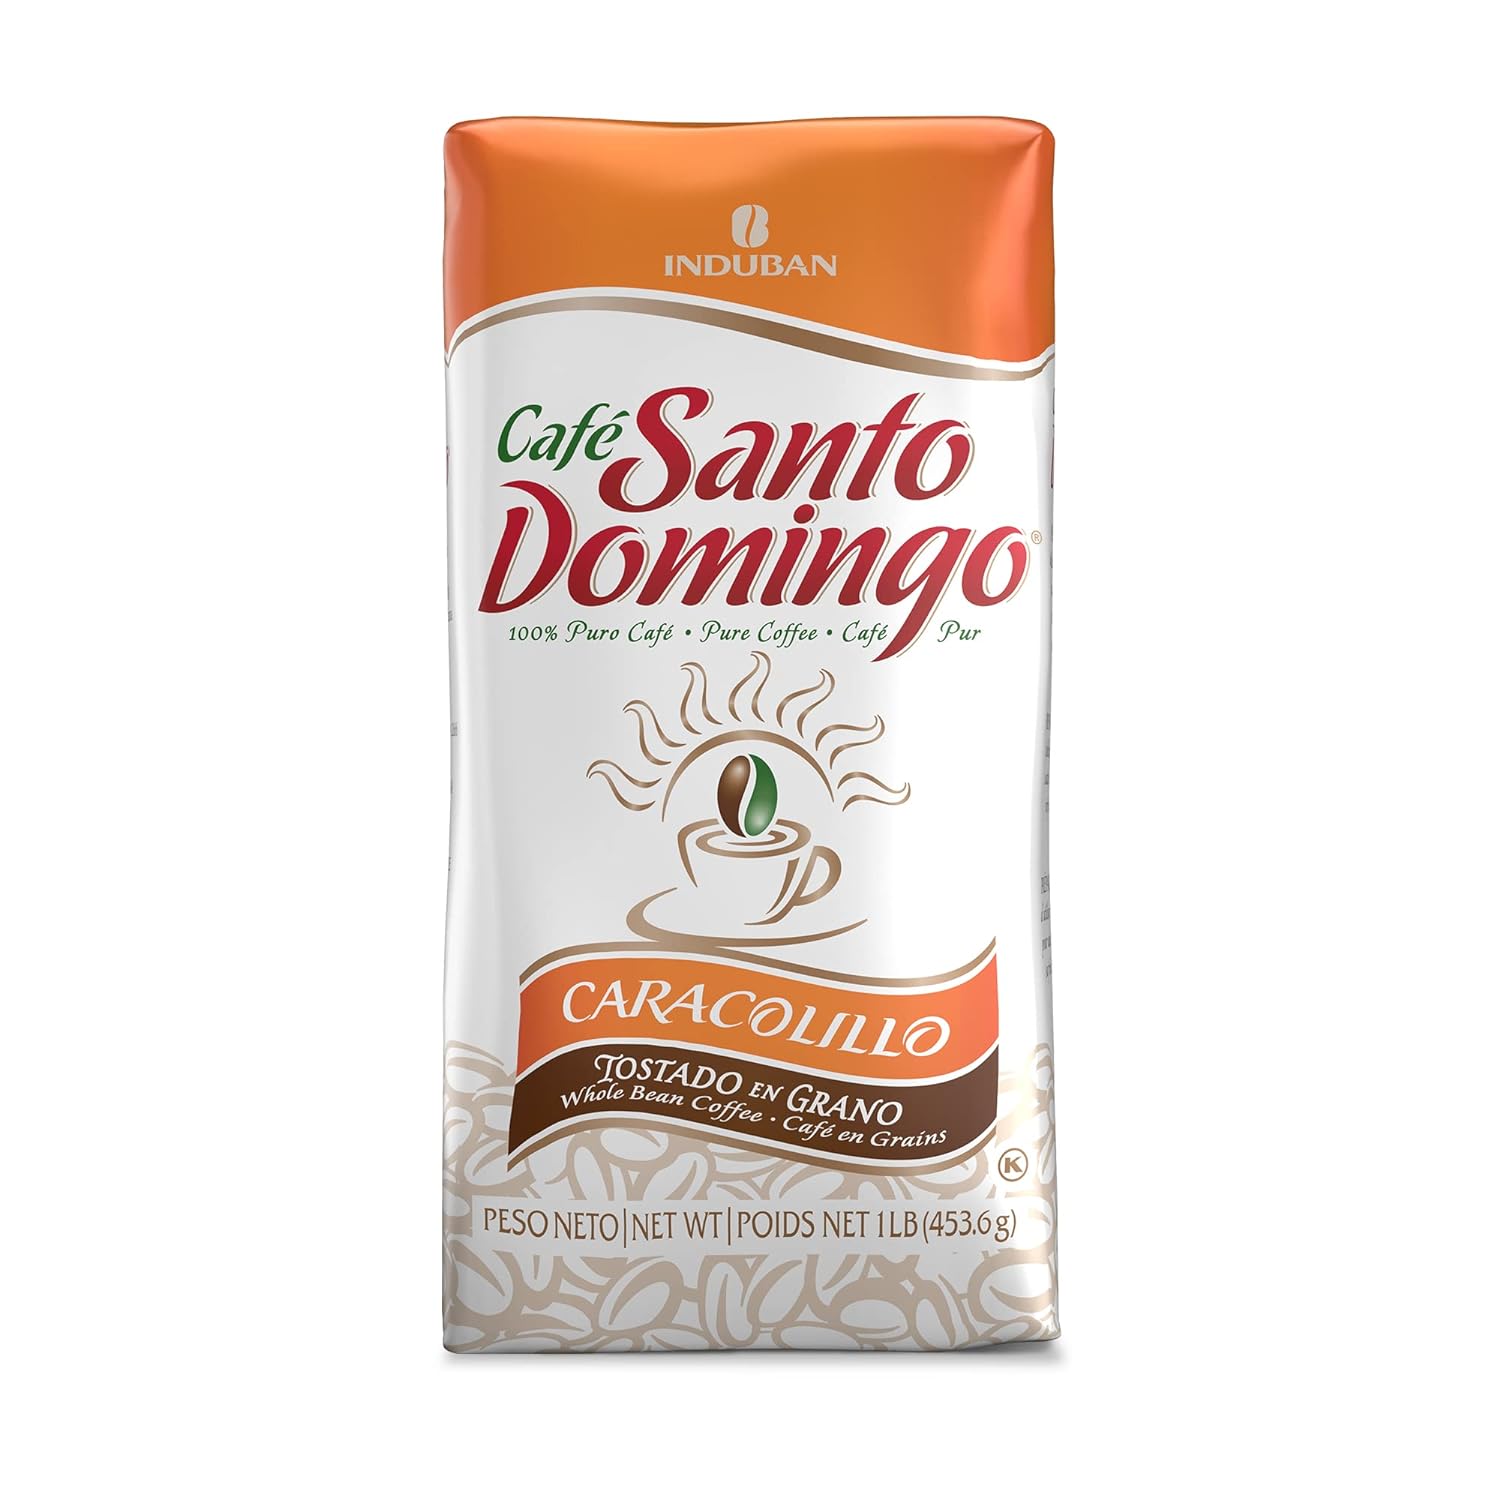 Café Santo Domingo Caracolillo, 16 oz Bag, Whole Bean Peaberry Coffee - Product from the Dominican Republic (Pack of 1)